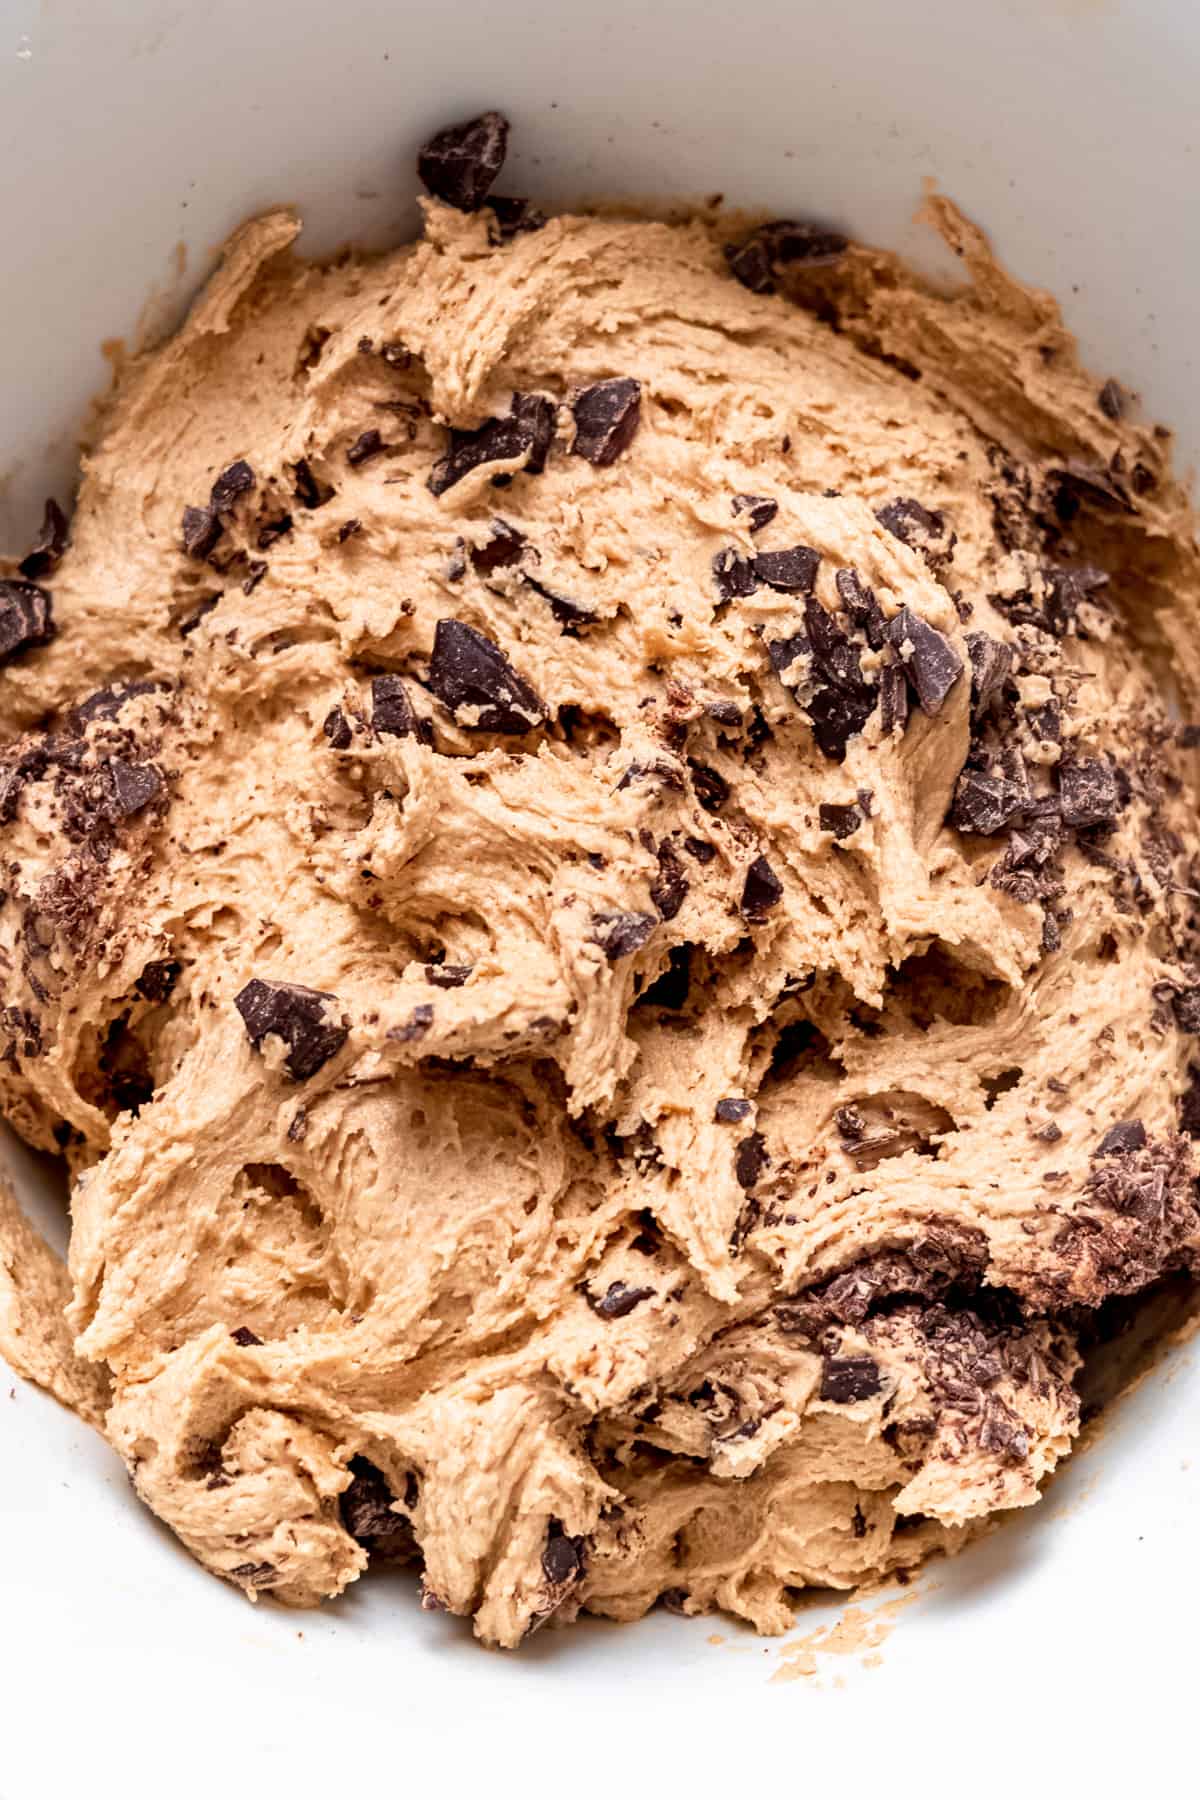 Cookie dough with chocolate and cardamom.